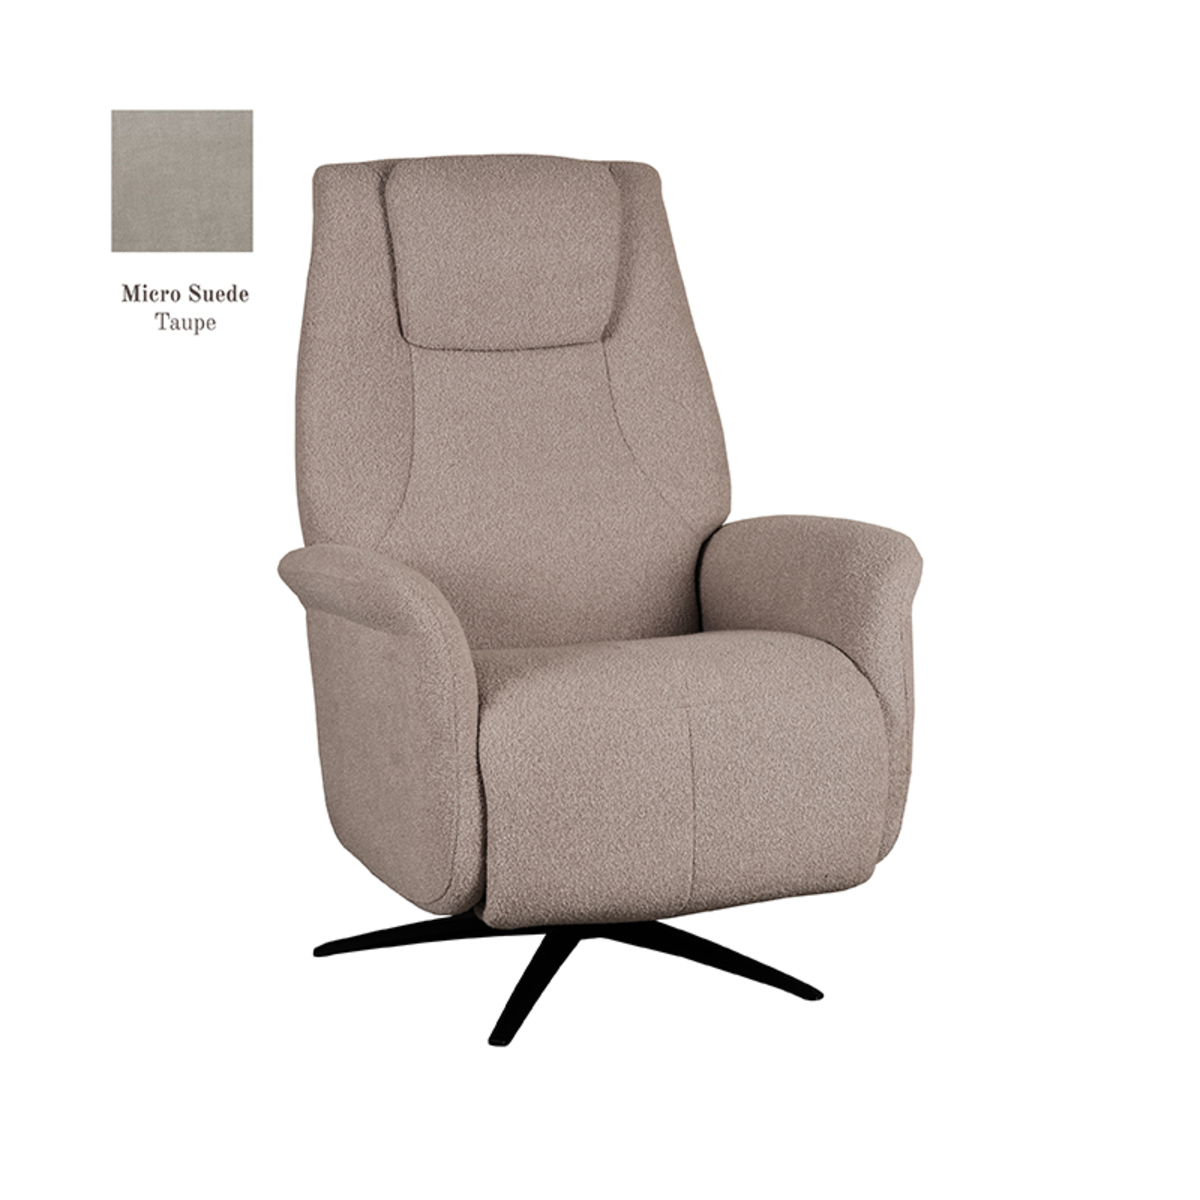 Fauteuil Stockholm - Taupe - Micro Suede - Elektrische